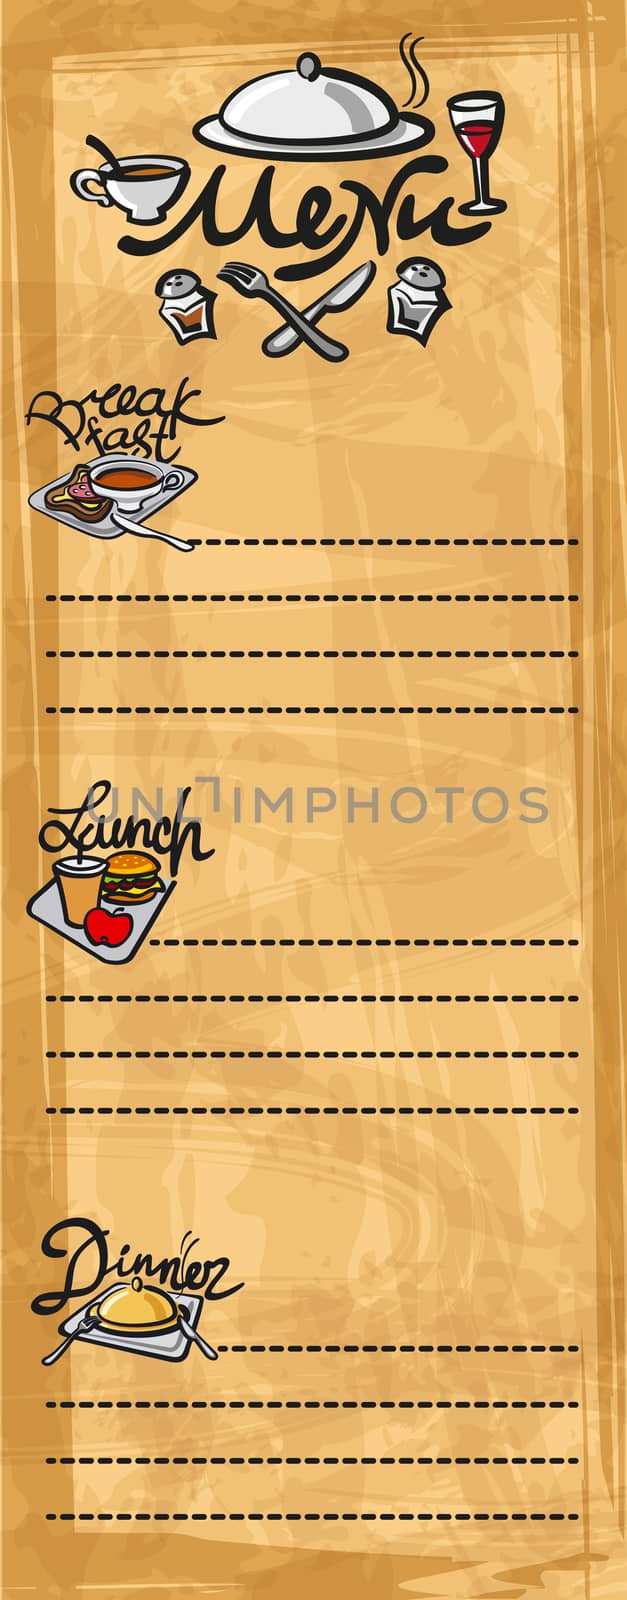 illustration of main dishes food menu for cafe and restaurant